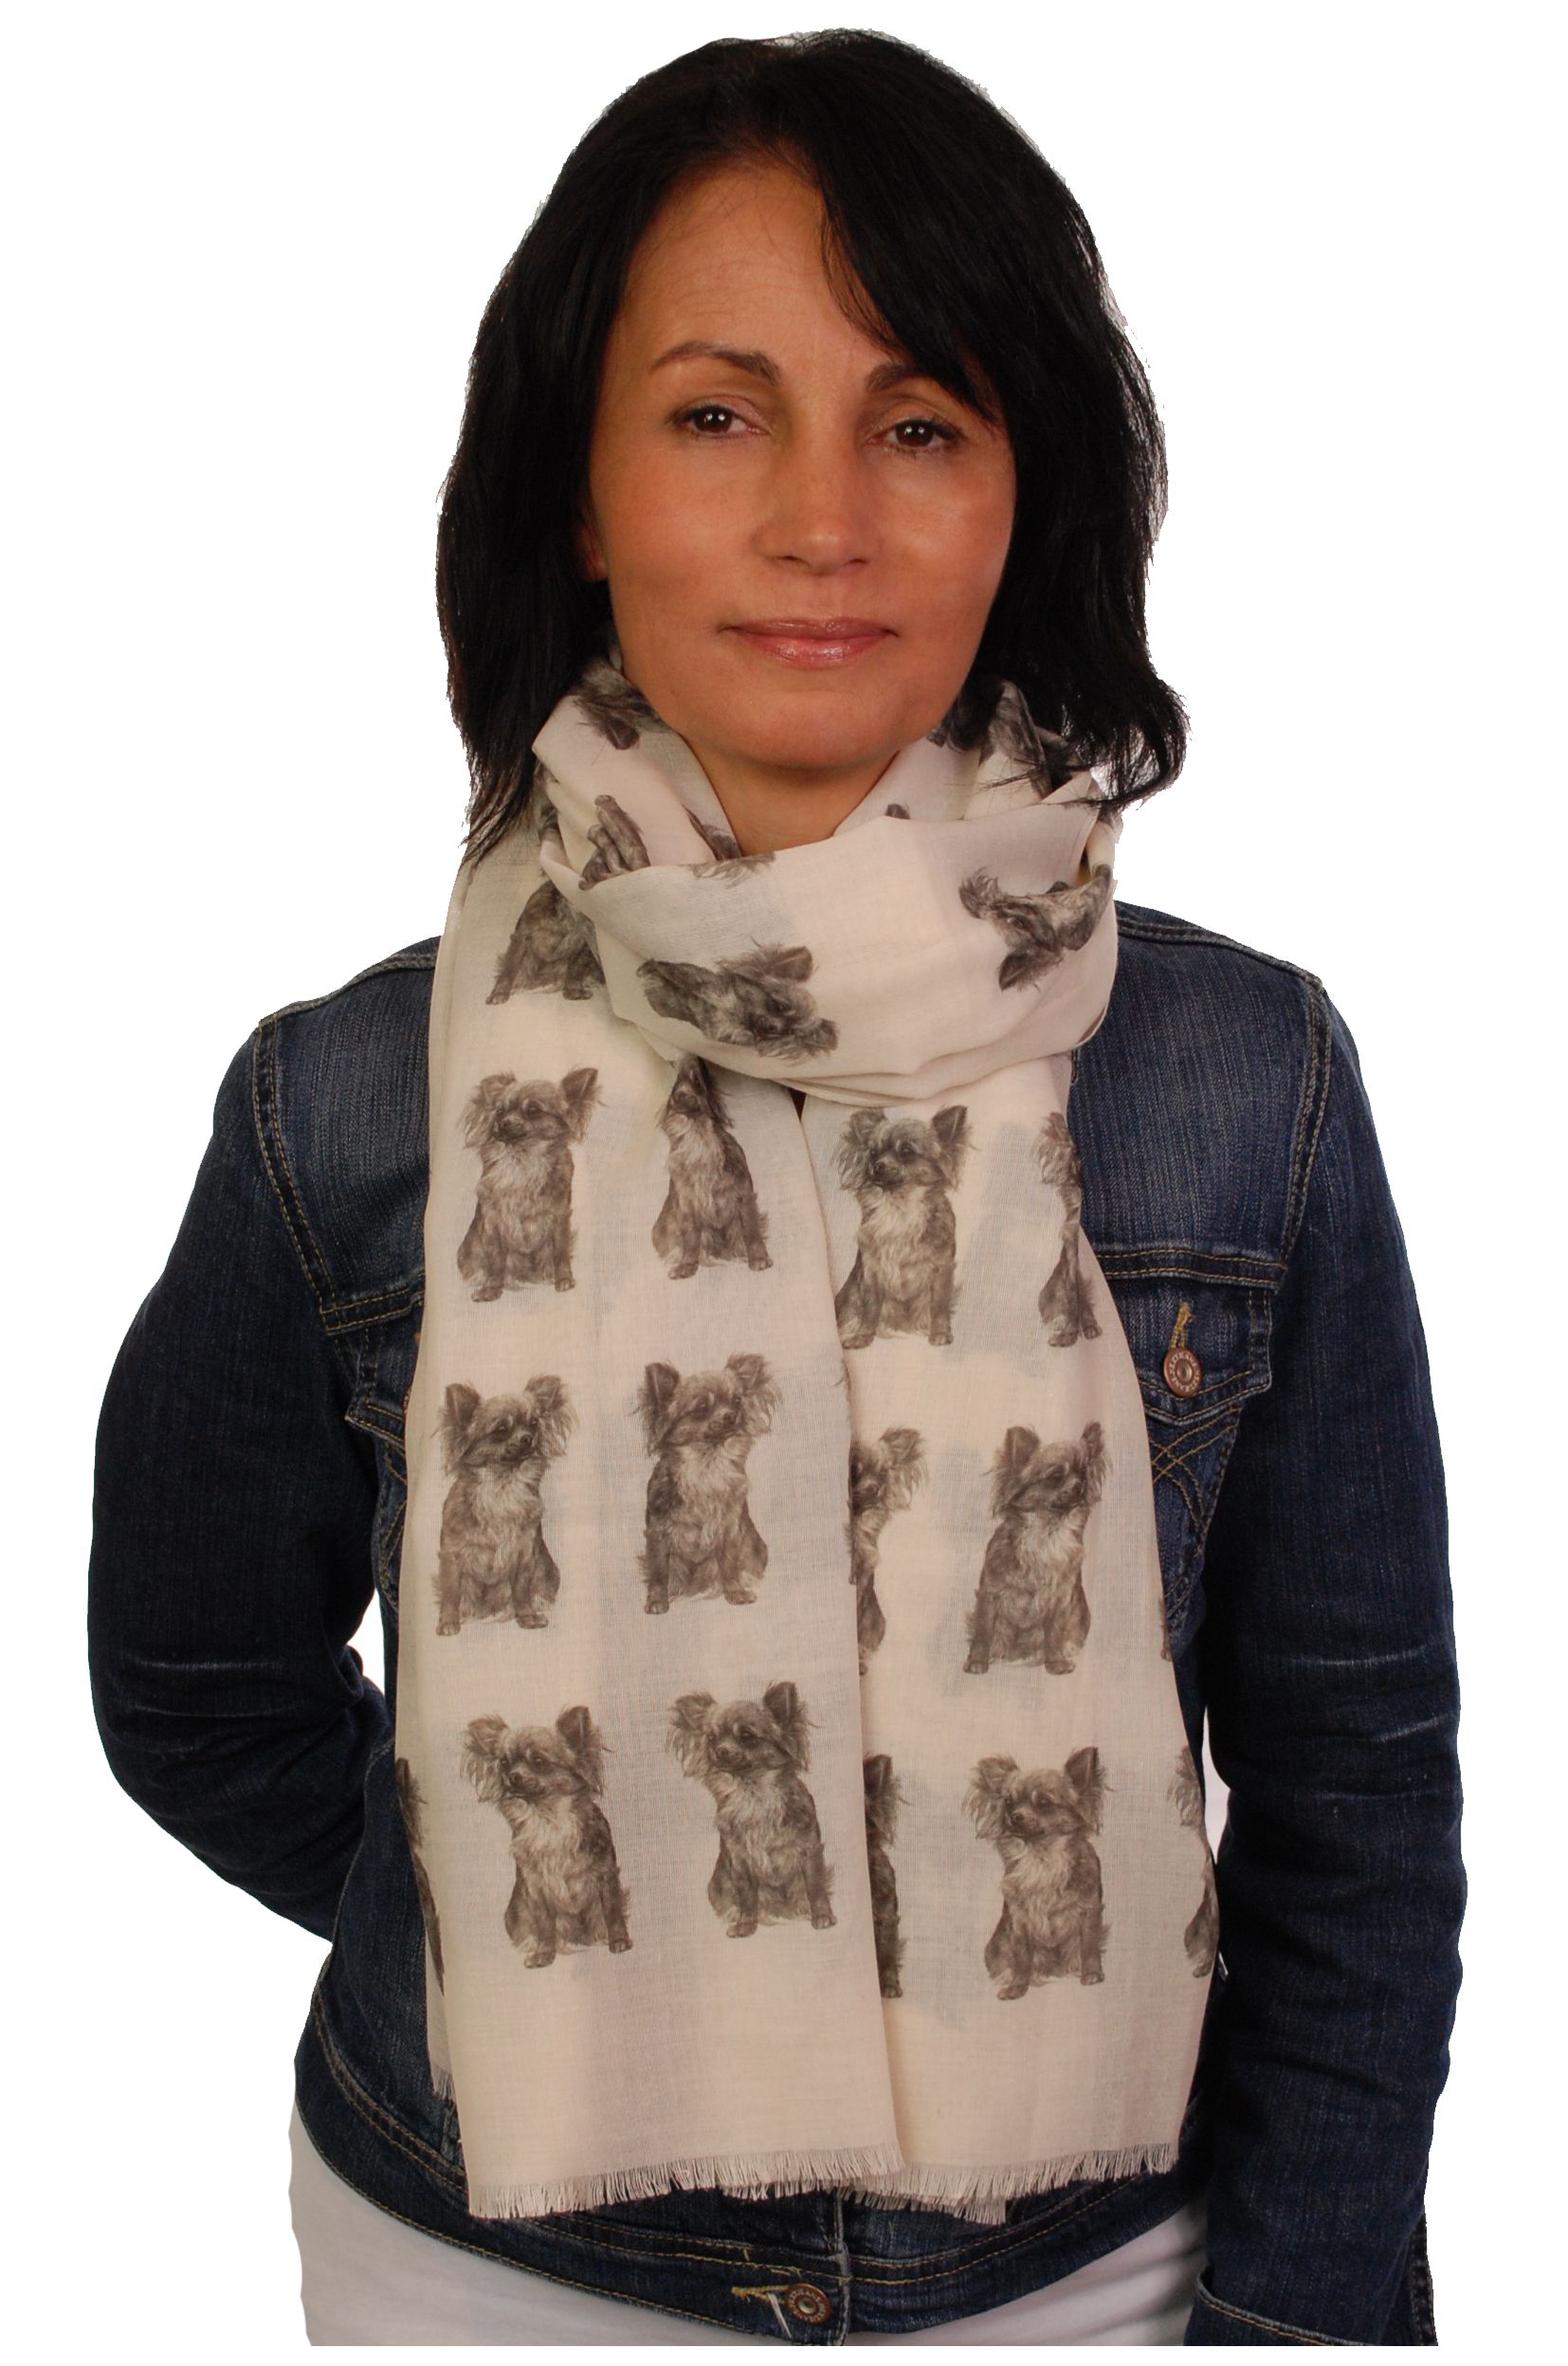 Mike Sibley Chihuahua licensed design ladies fashion scarf